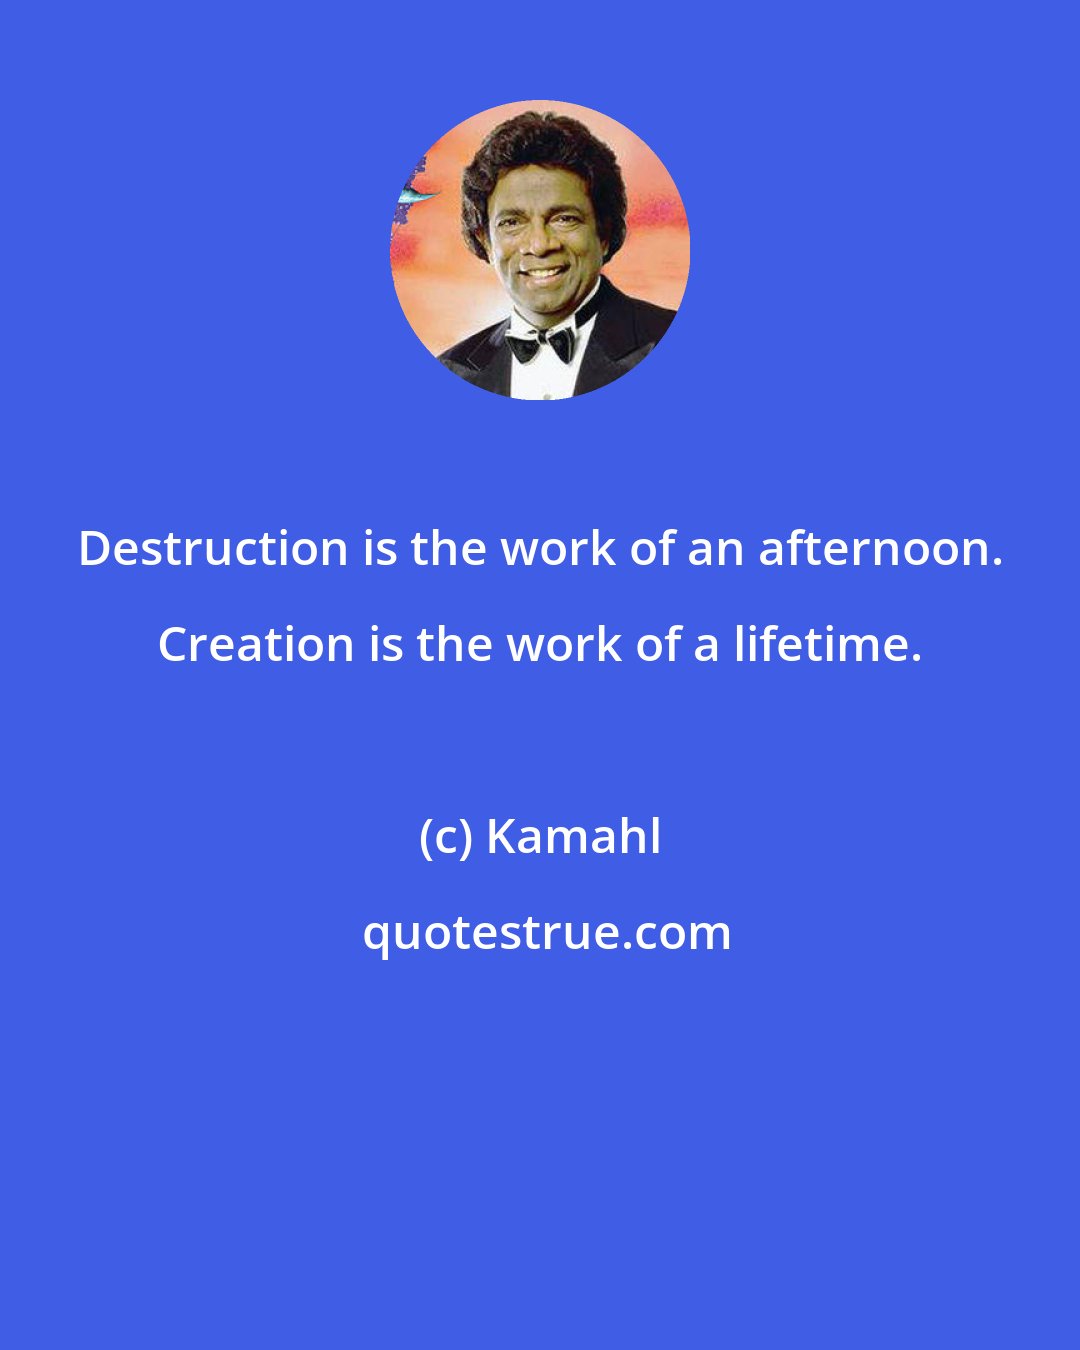 Kamahl: Destruction is the work of an afternoon. Creation is the work of a lifetime.